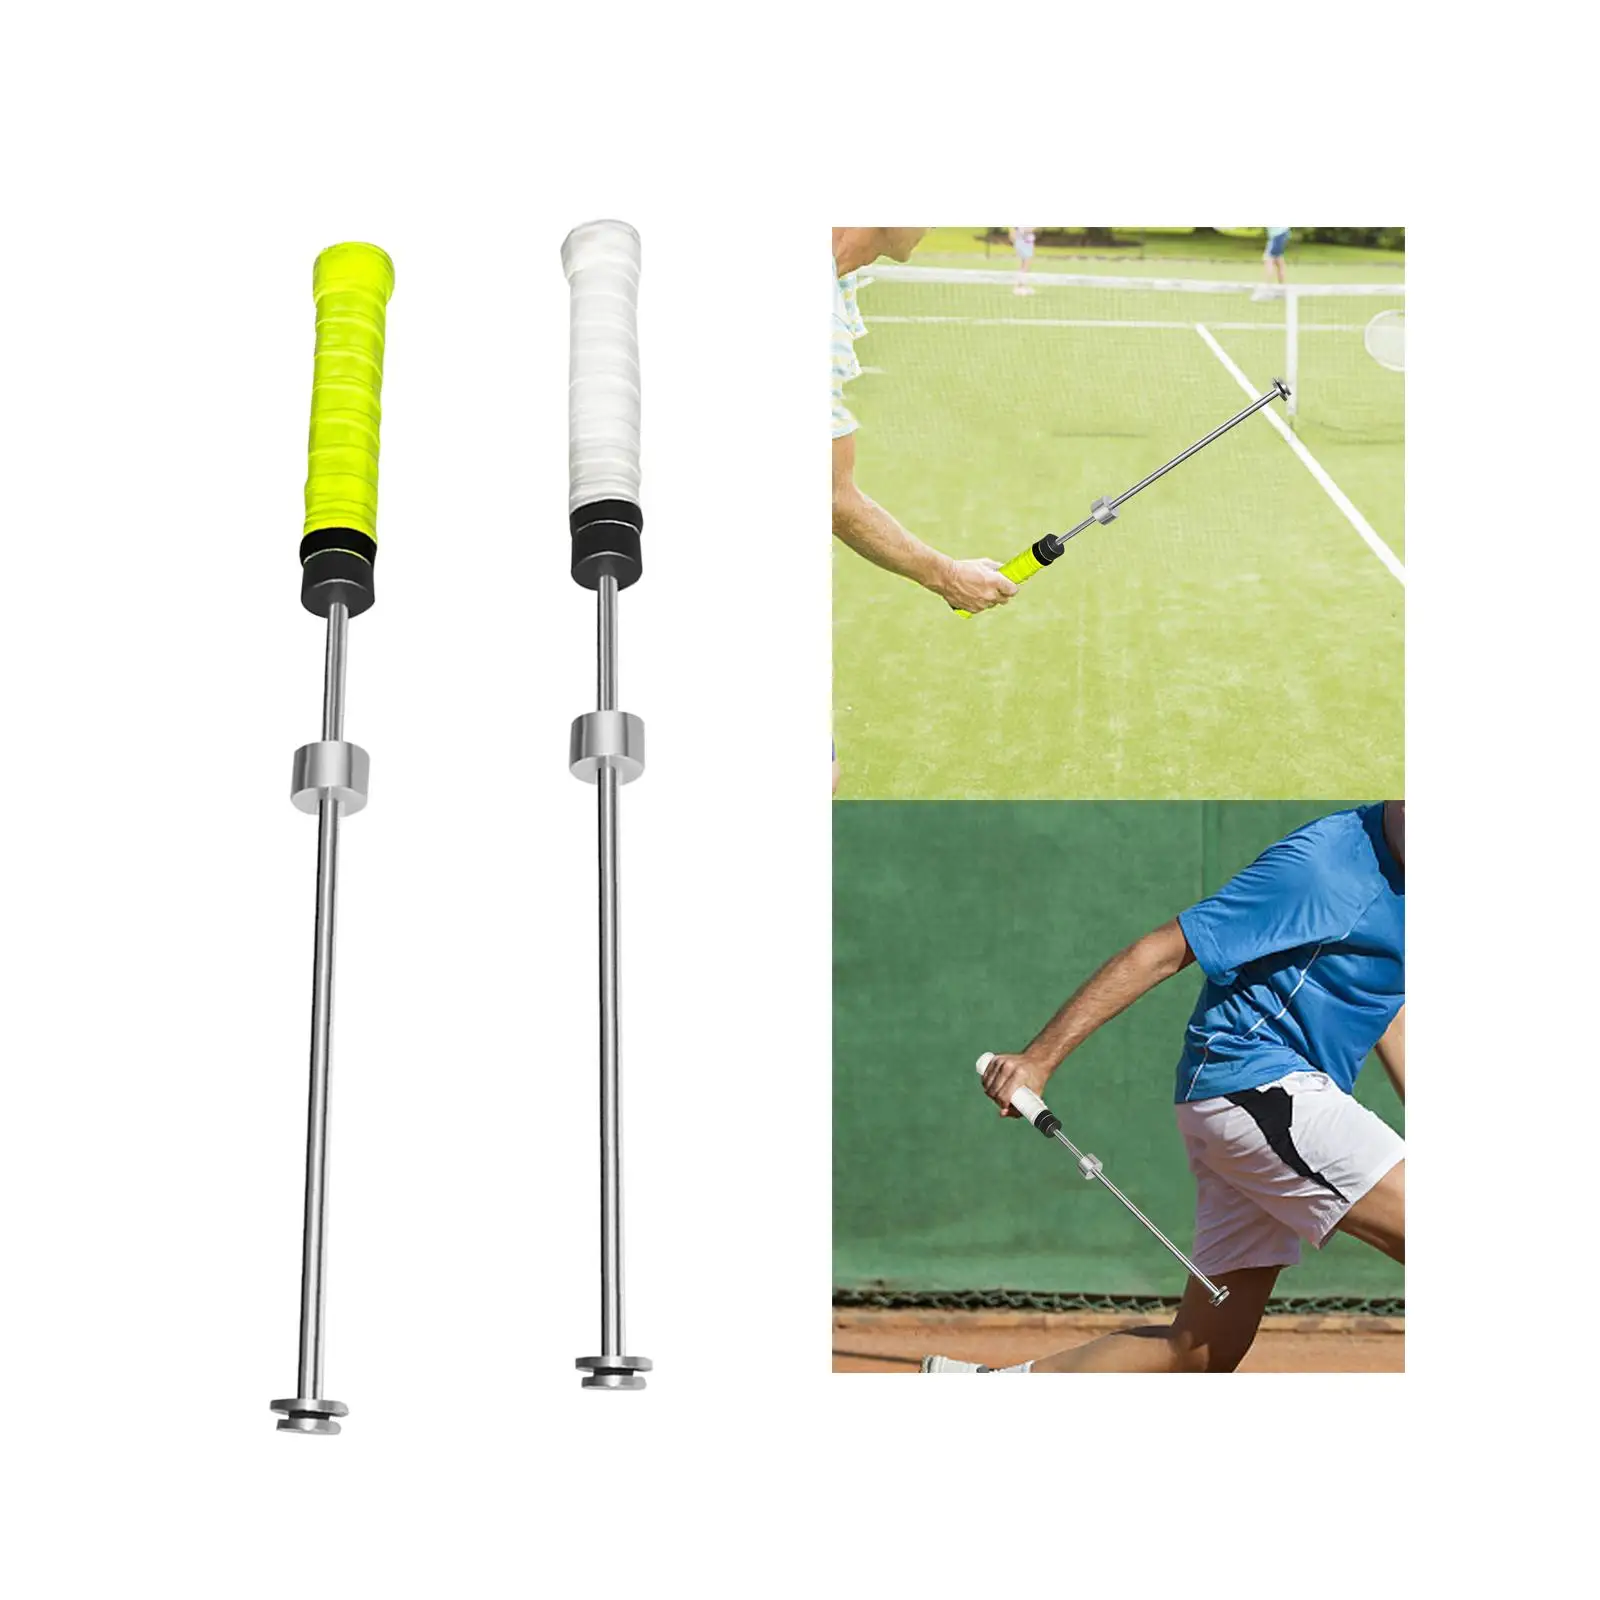 with Sound Beginner Sports Tool Correct Posture Durable Nonslip Grip Tennis